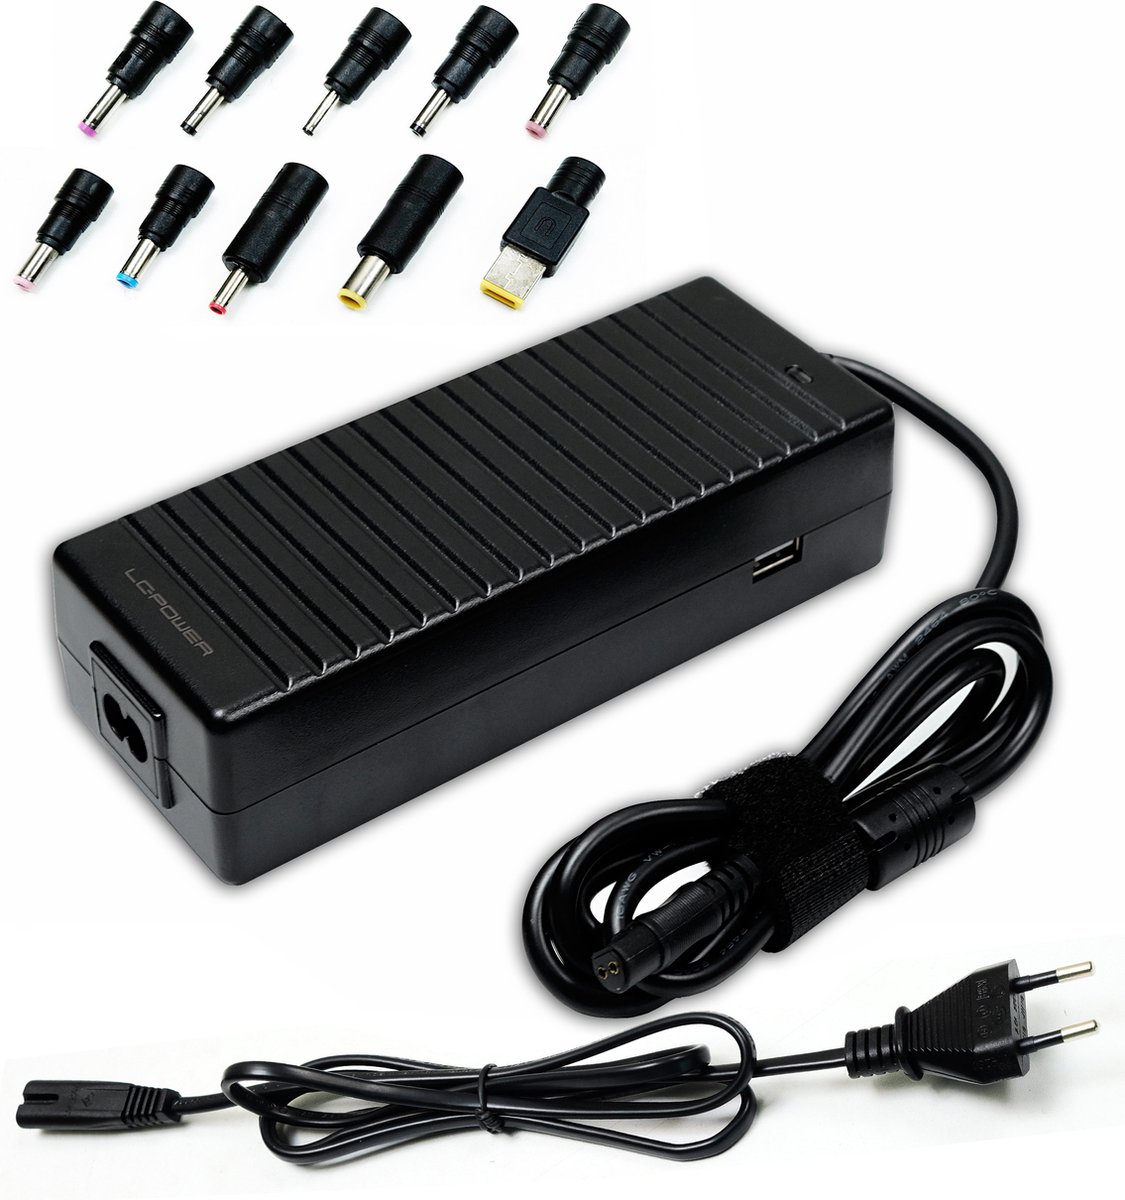 CHARGEUR UNIVERSEL ALIMENTATION PC PORTABLE 90W pour Acer Dell HP/Compaq  Toshiba